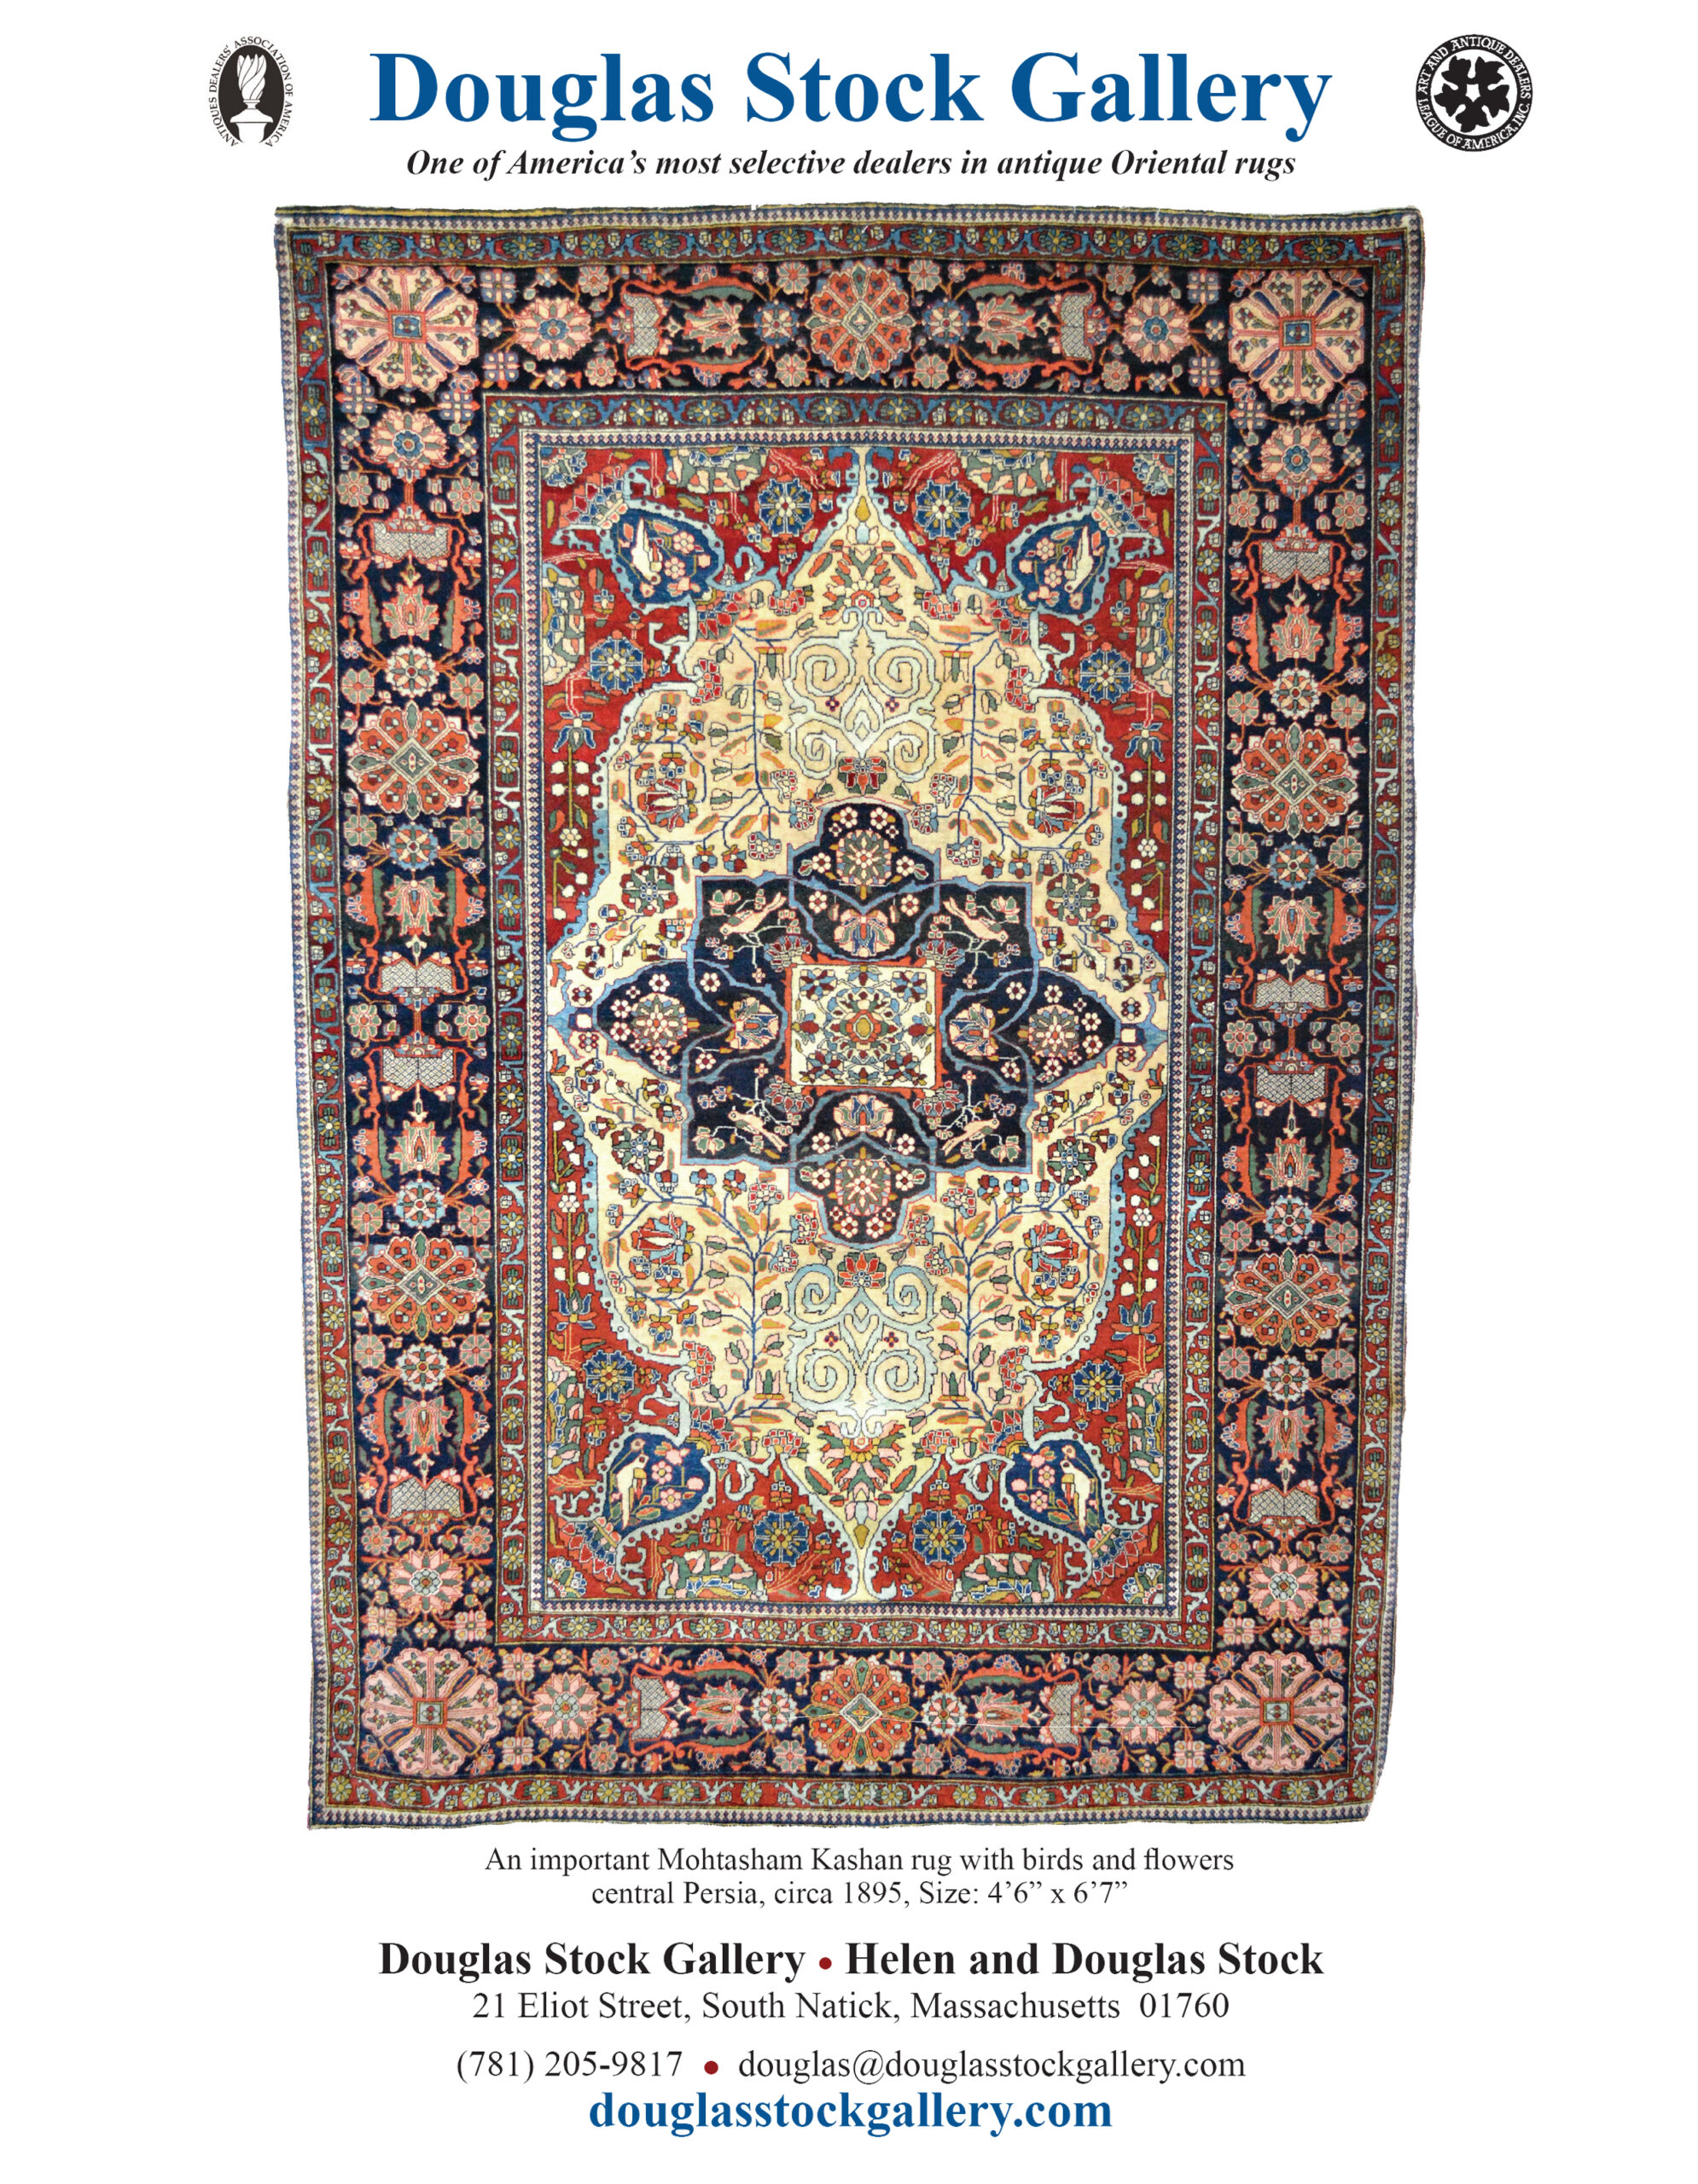 Douglas Stock Gallery Oriental Rugs advertisement in The Magazine Antiques May / June 2022 issue featuring a world class antique Mohtasham Kashan rug, central Persia, late 19th century